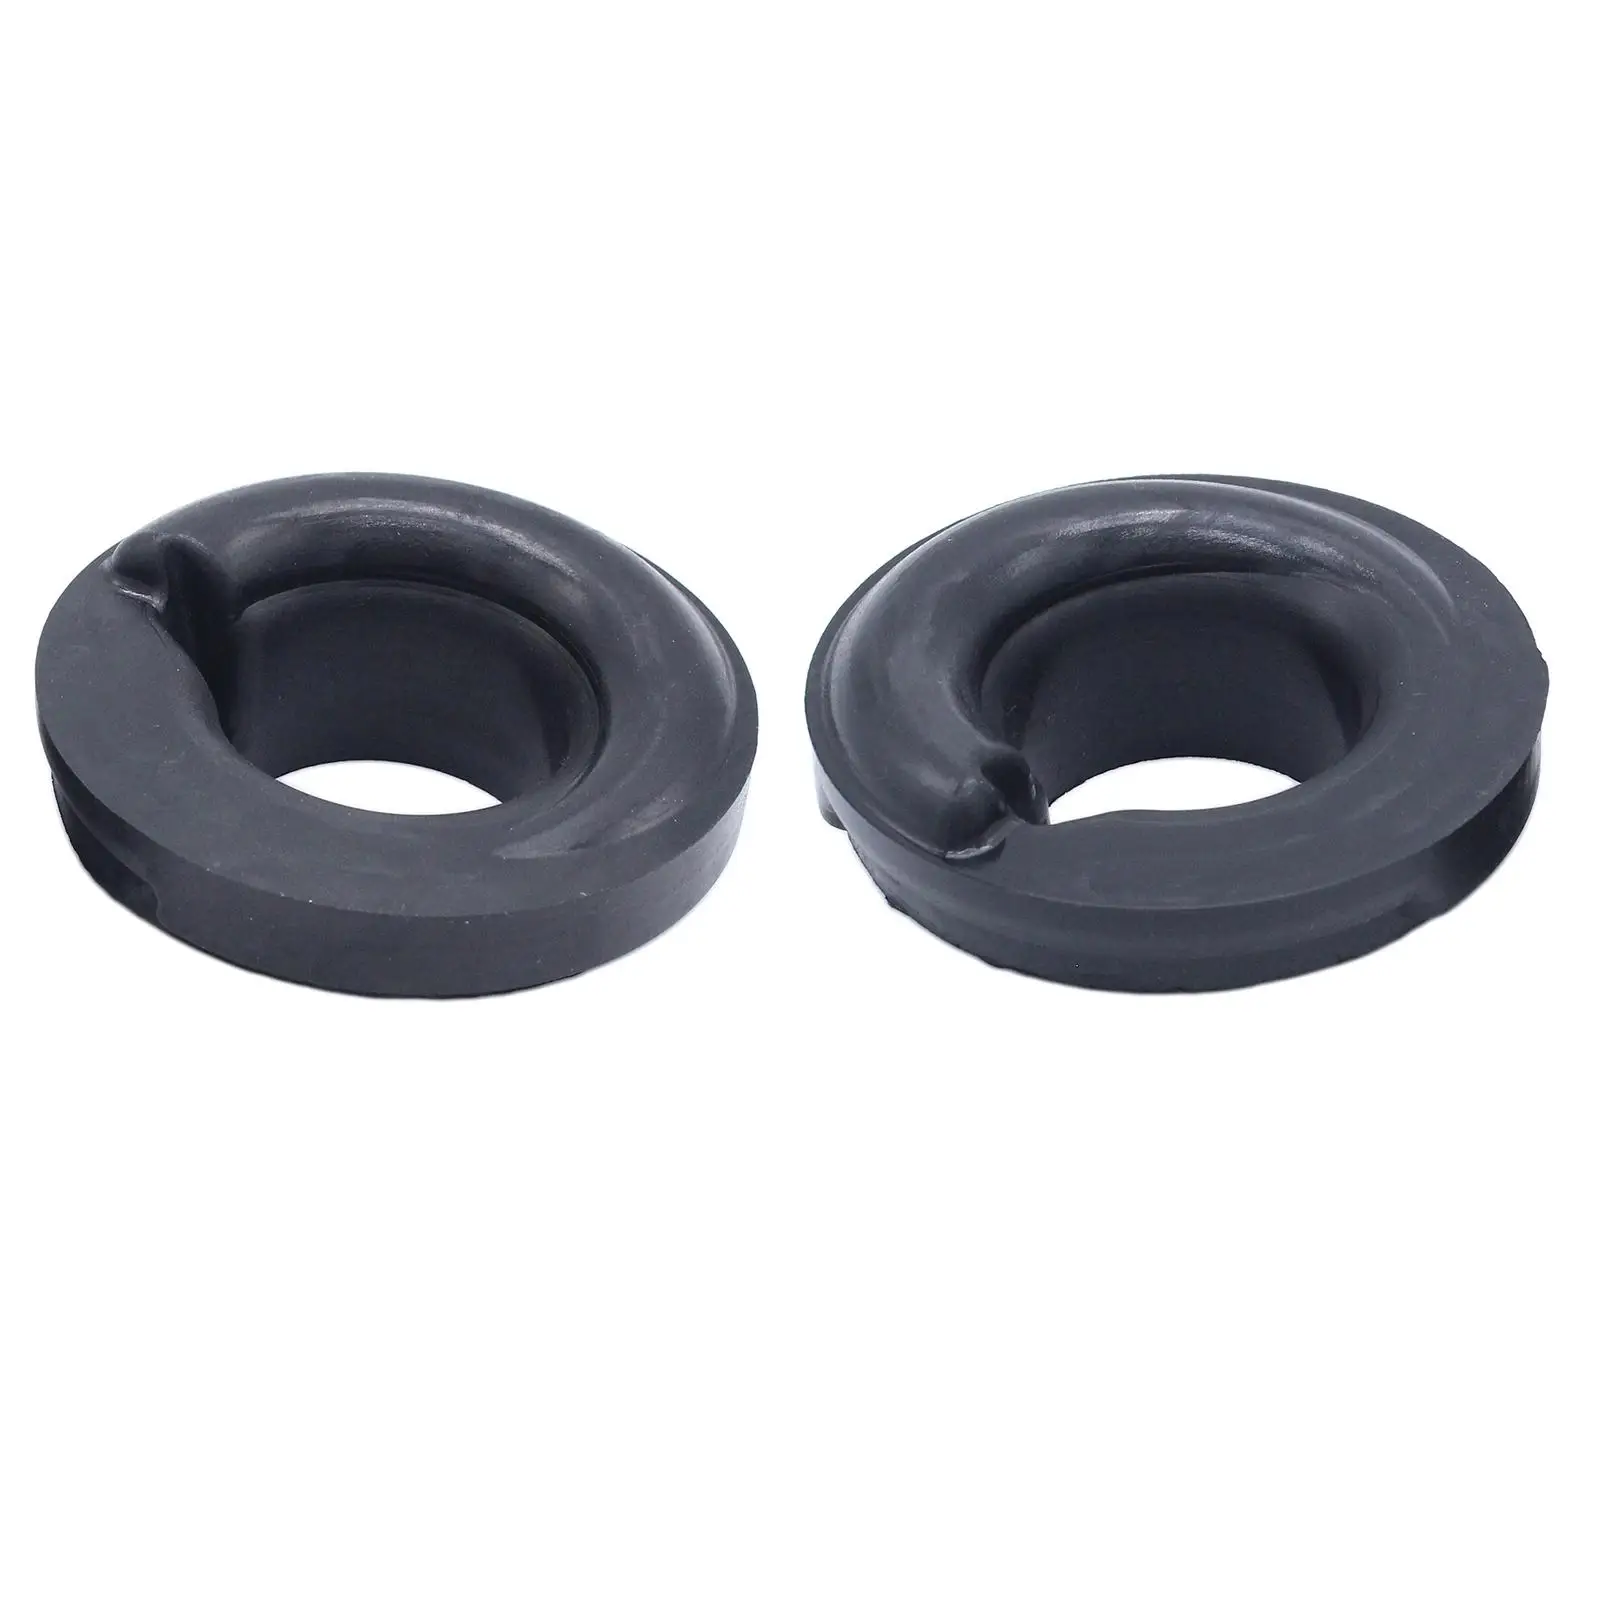 2x Car Rear Lower Rubber Spring Seat Cup Mount for VW Transporter T5   2003-2015 for Caravelle Cups Support Rubber Mounts